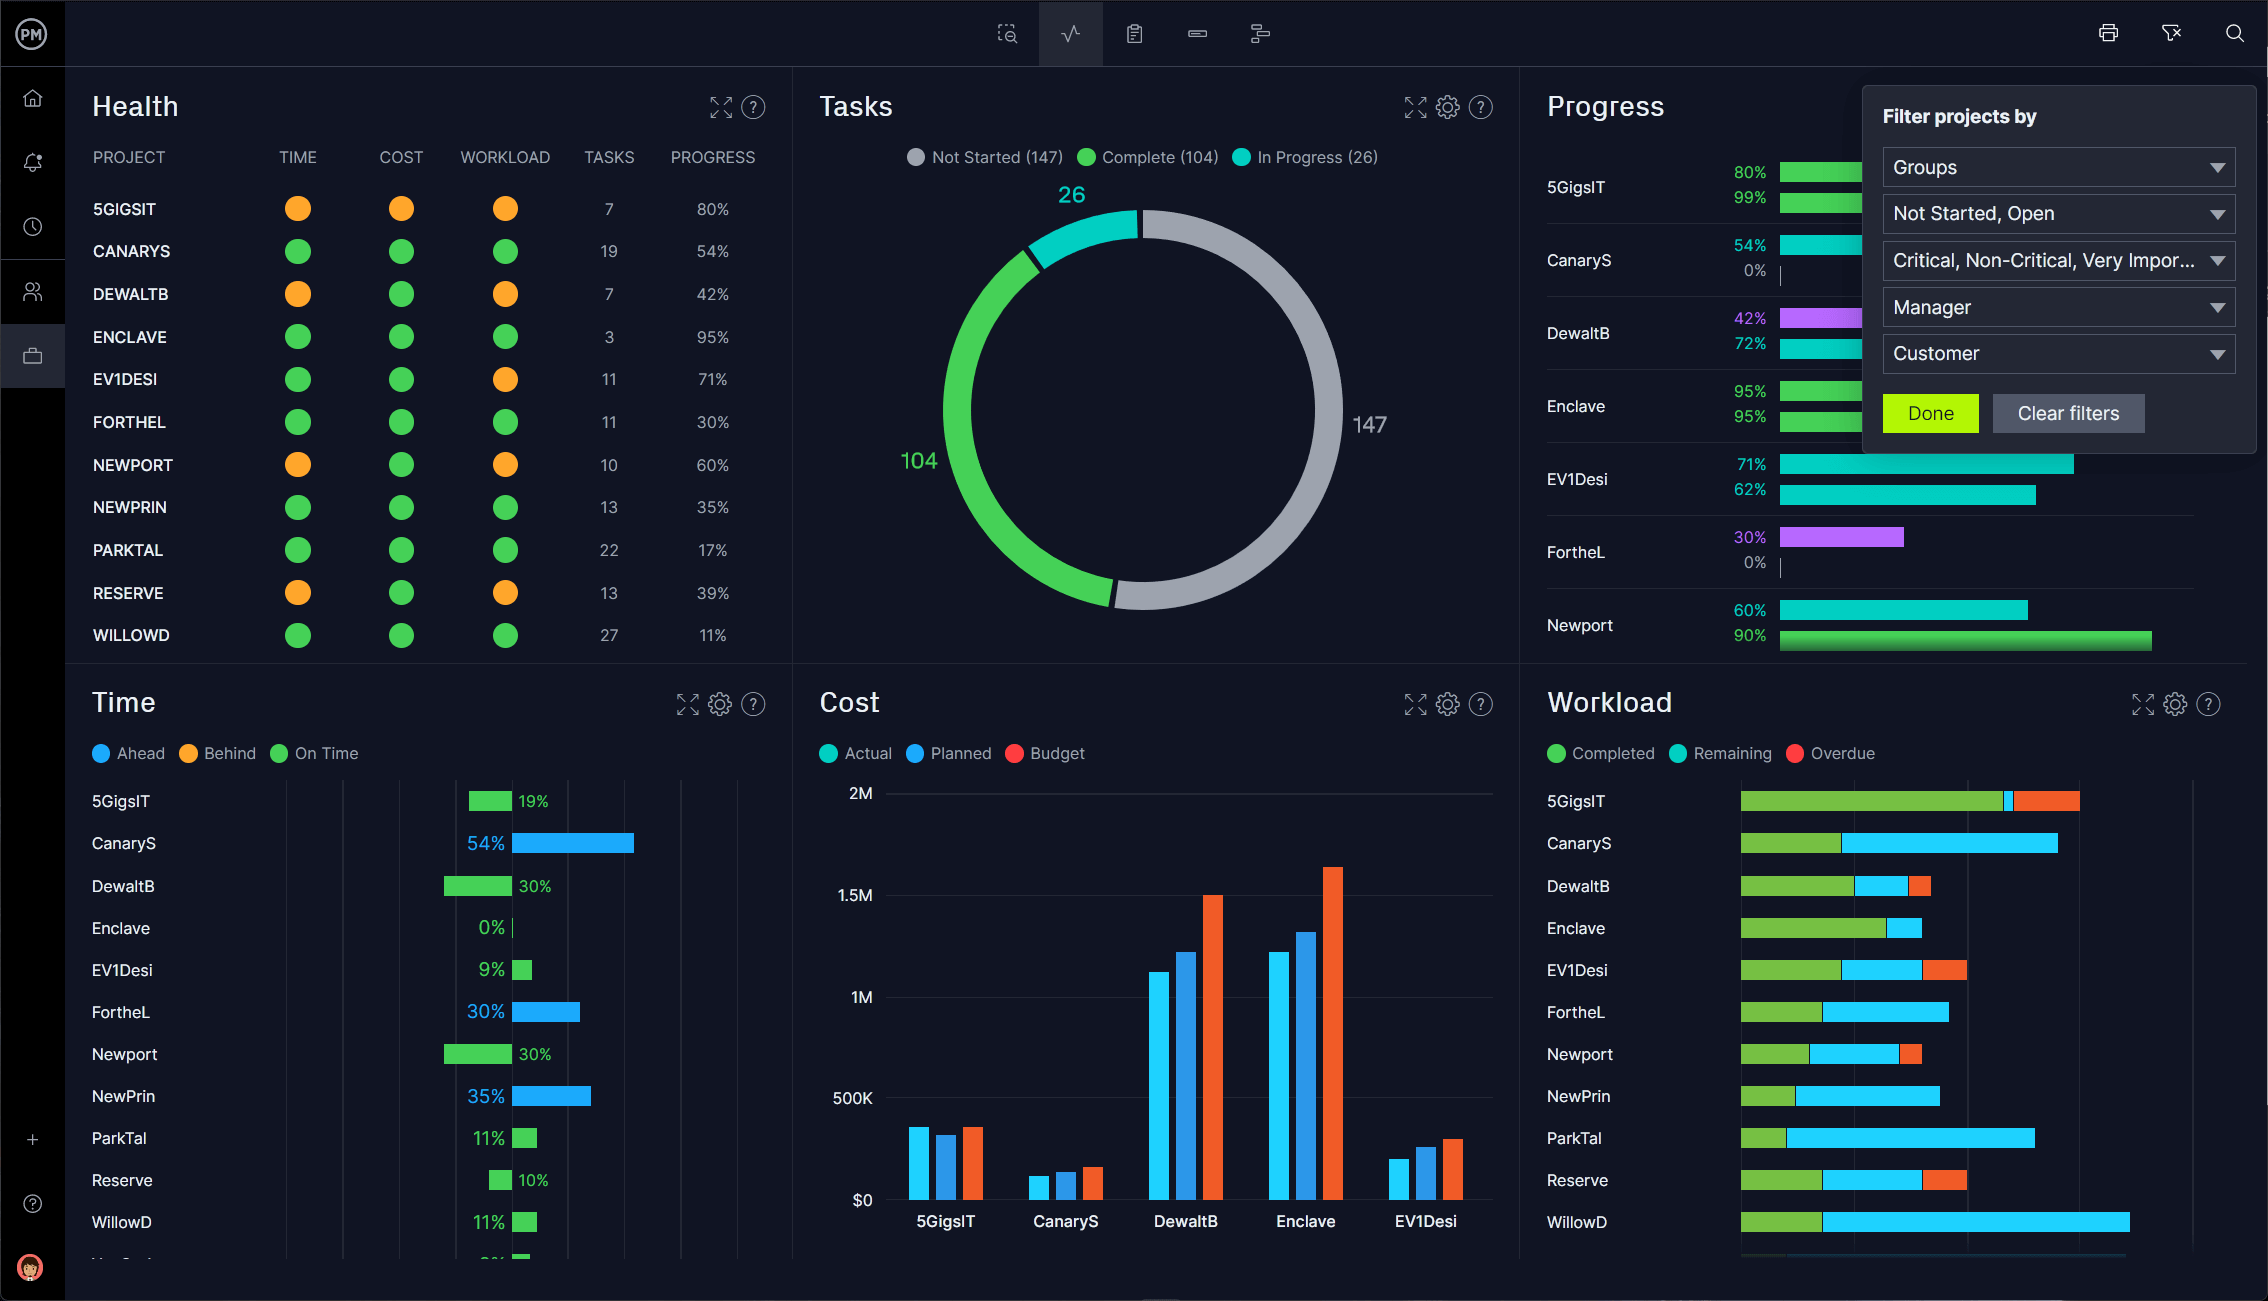 ProjectManager's dashboard showing equipment inventory metrics